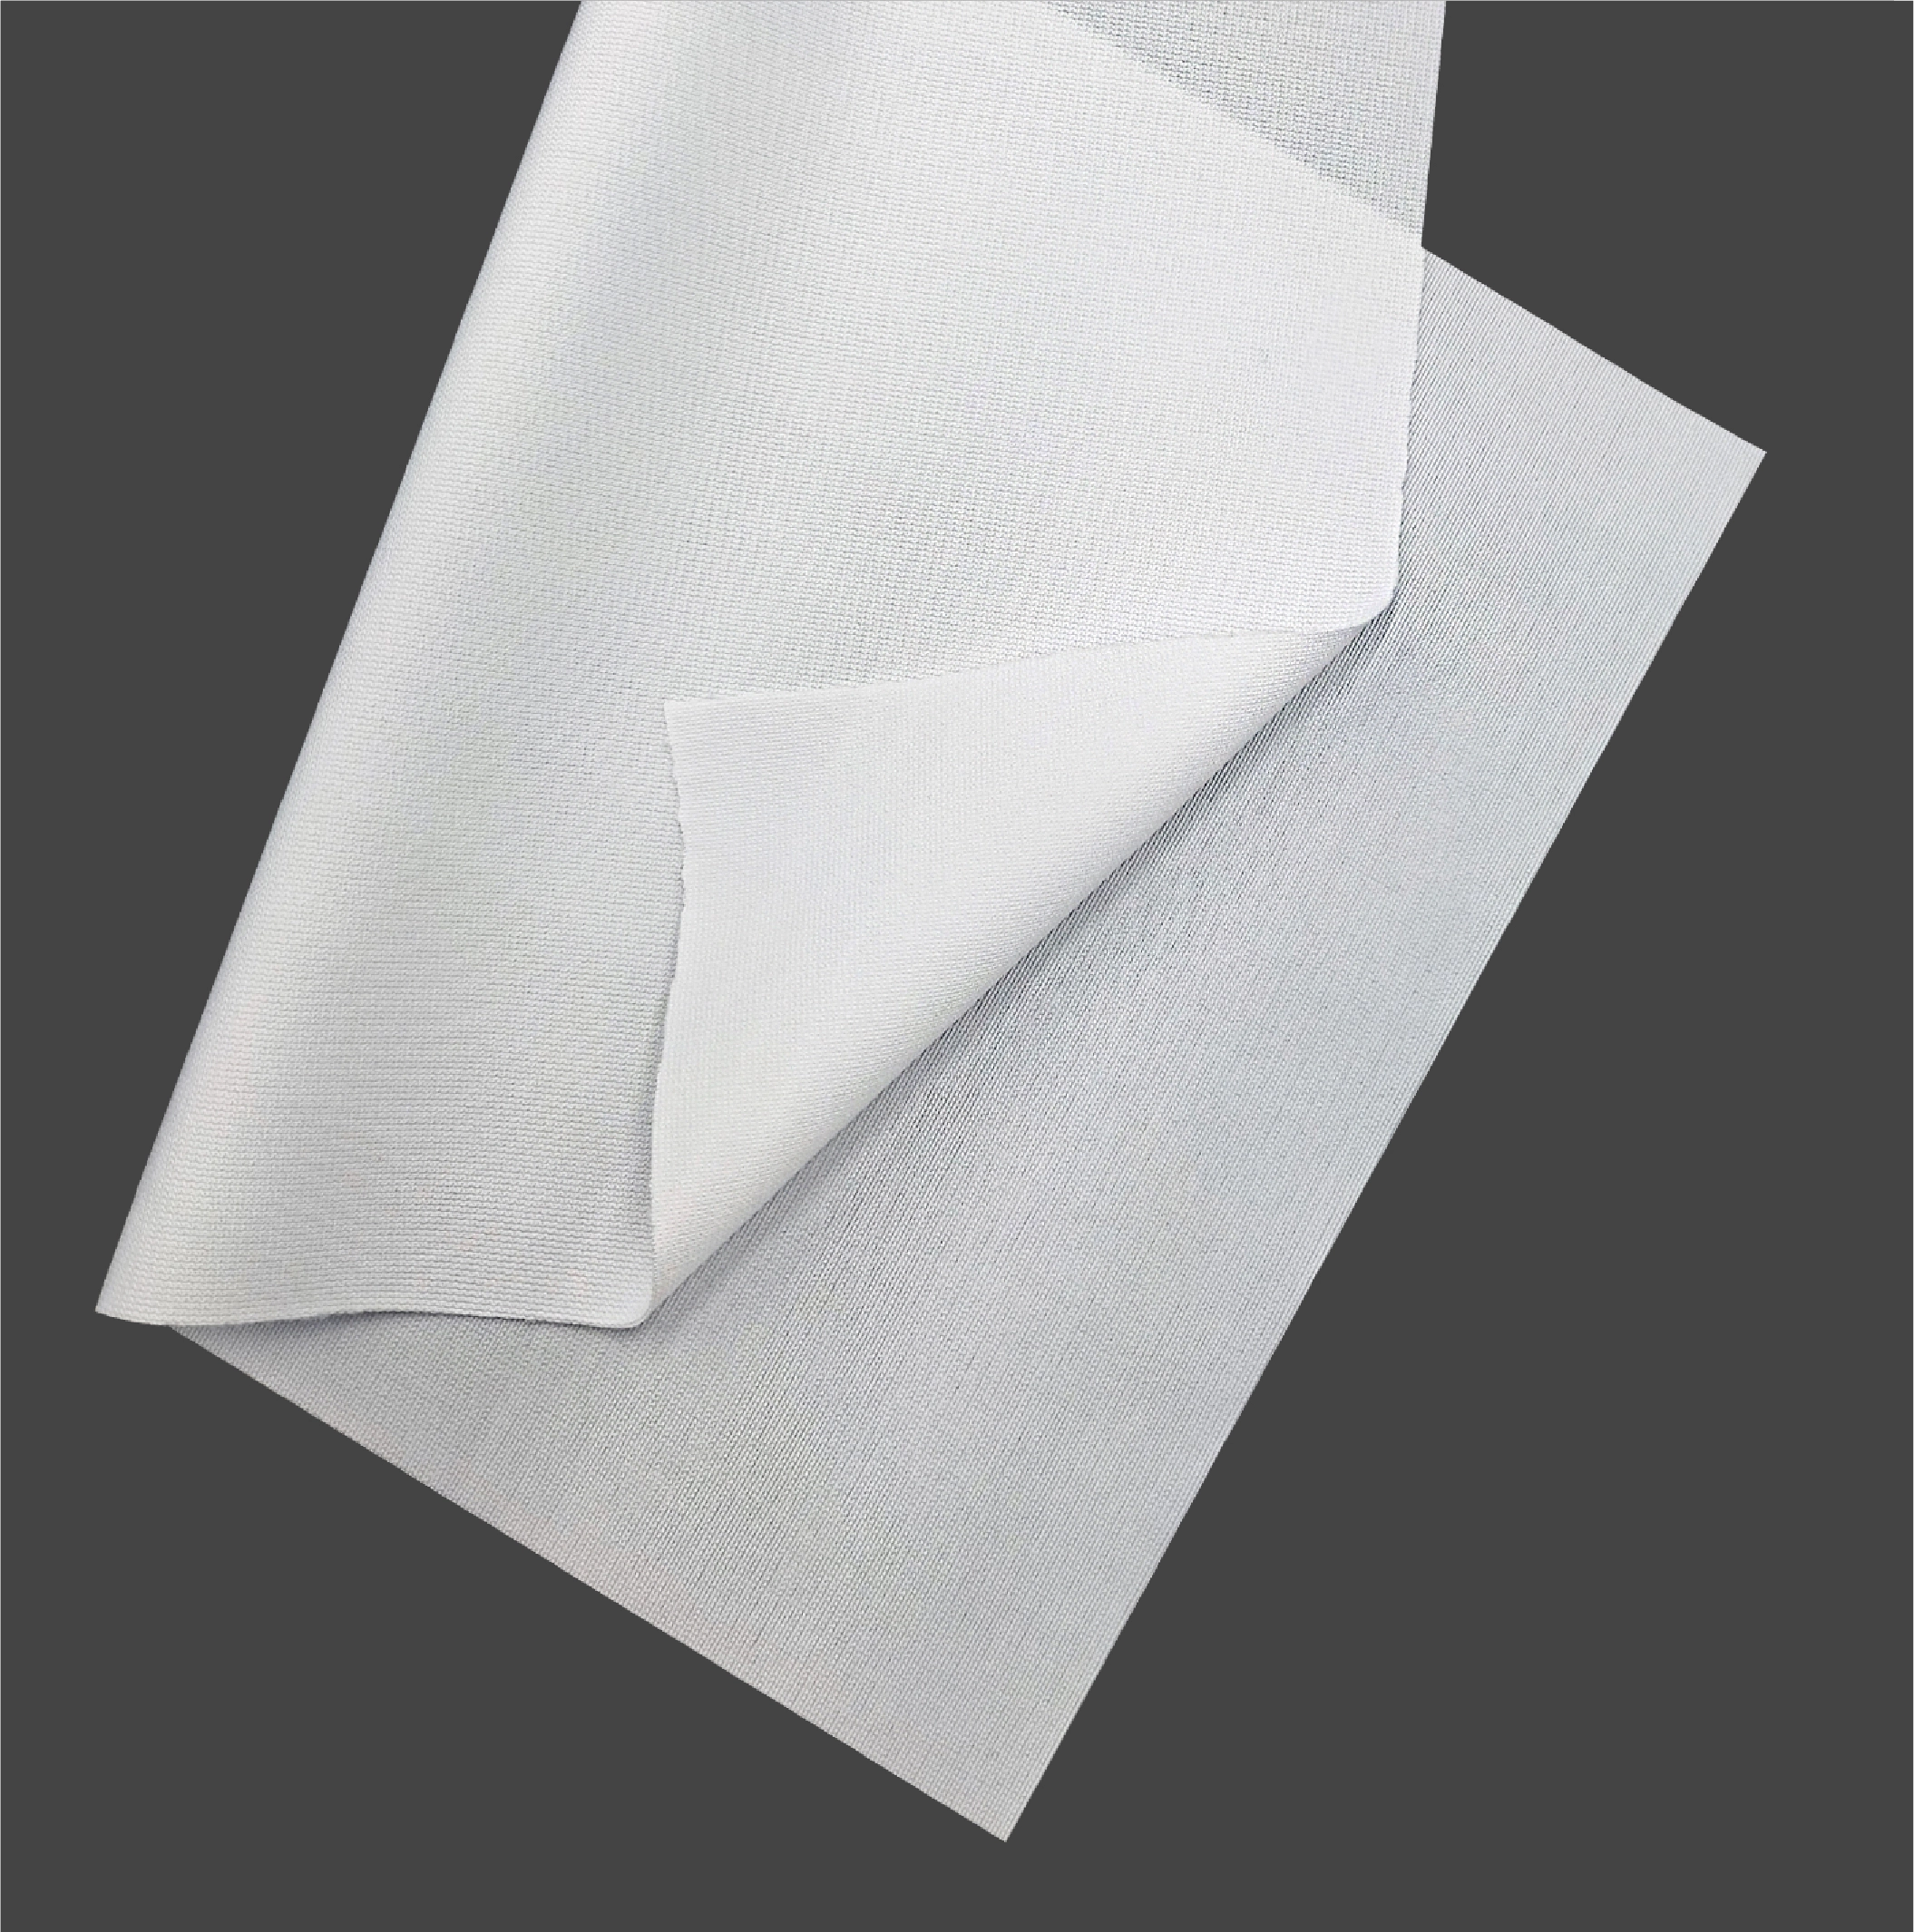 Advantages of JC Media's Smooth Stretch Woven Fabric